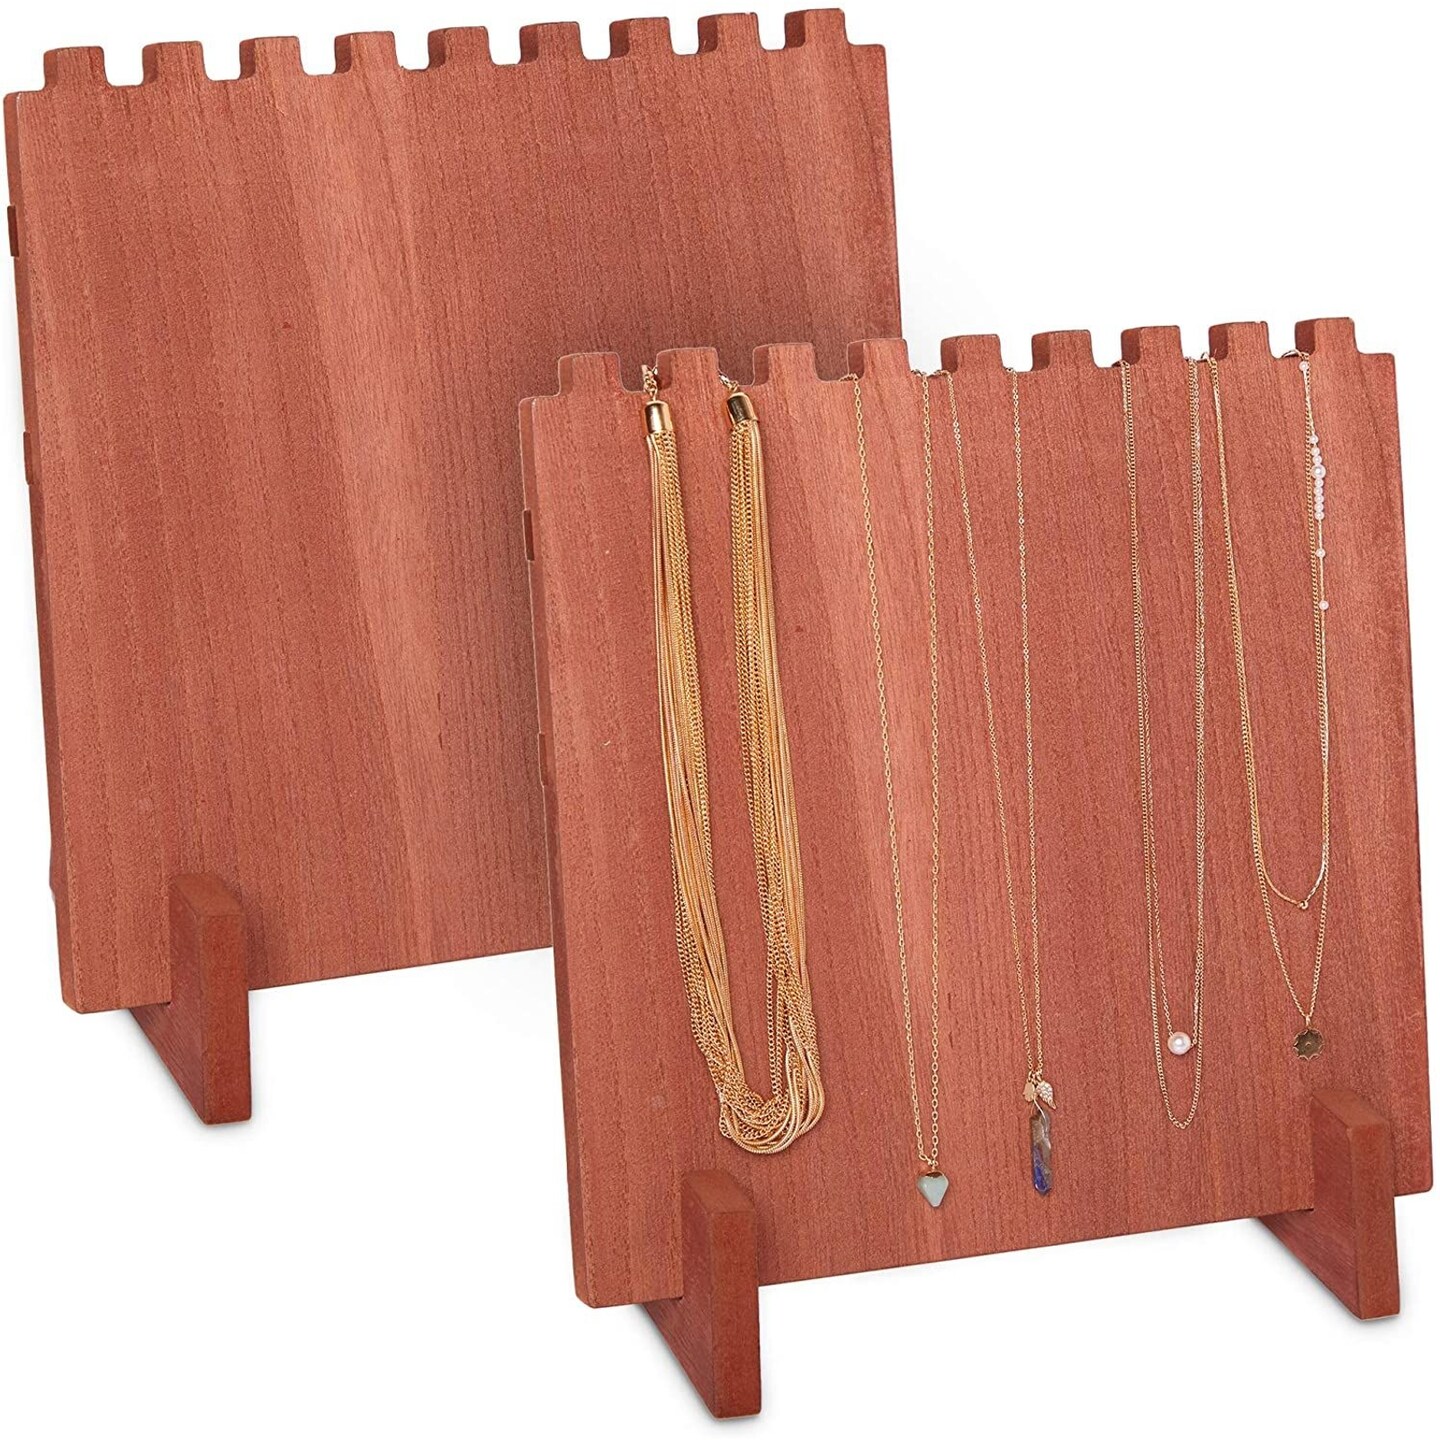 Natural Wood Necklace Holder Stand, Necklace Bracelet Jewelry Organizer Display  Stand - Holds up to 12 Necklaces - Walmart.com